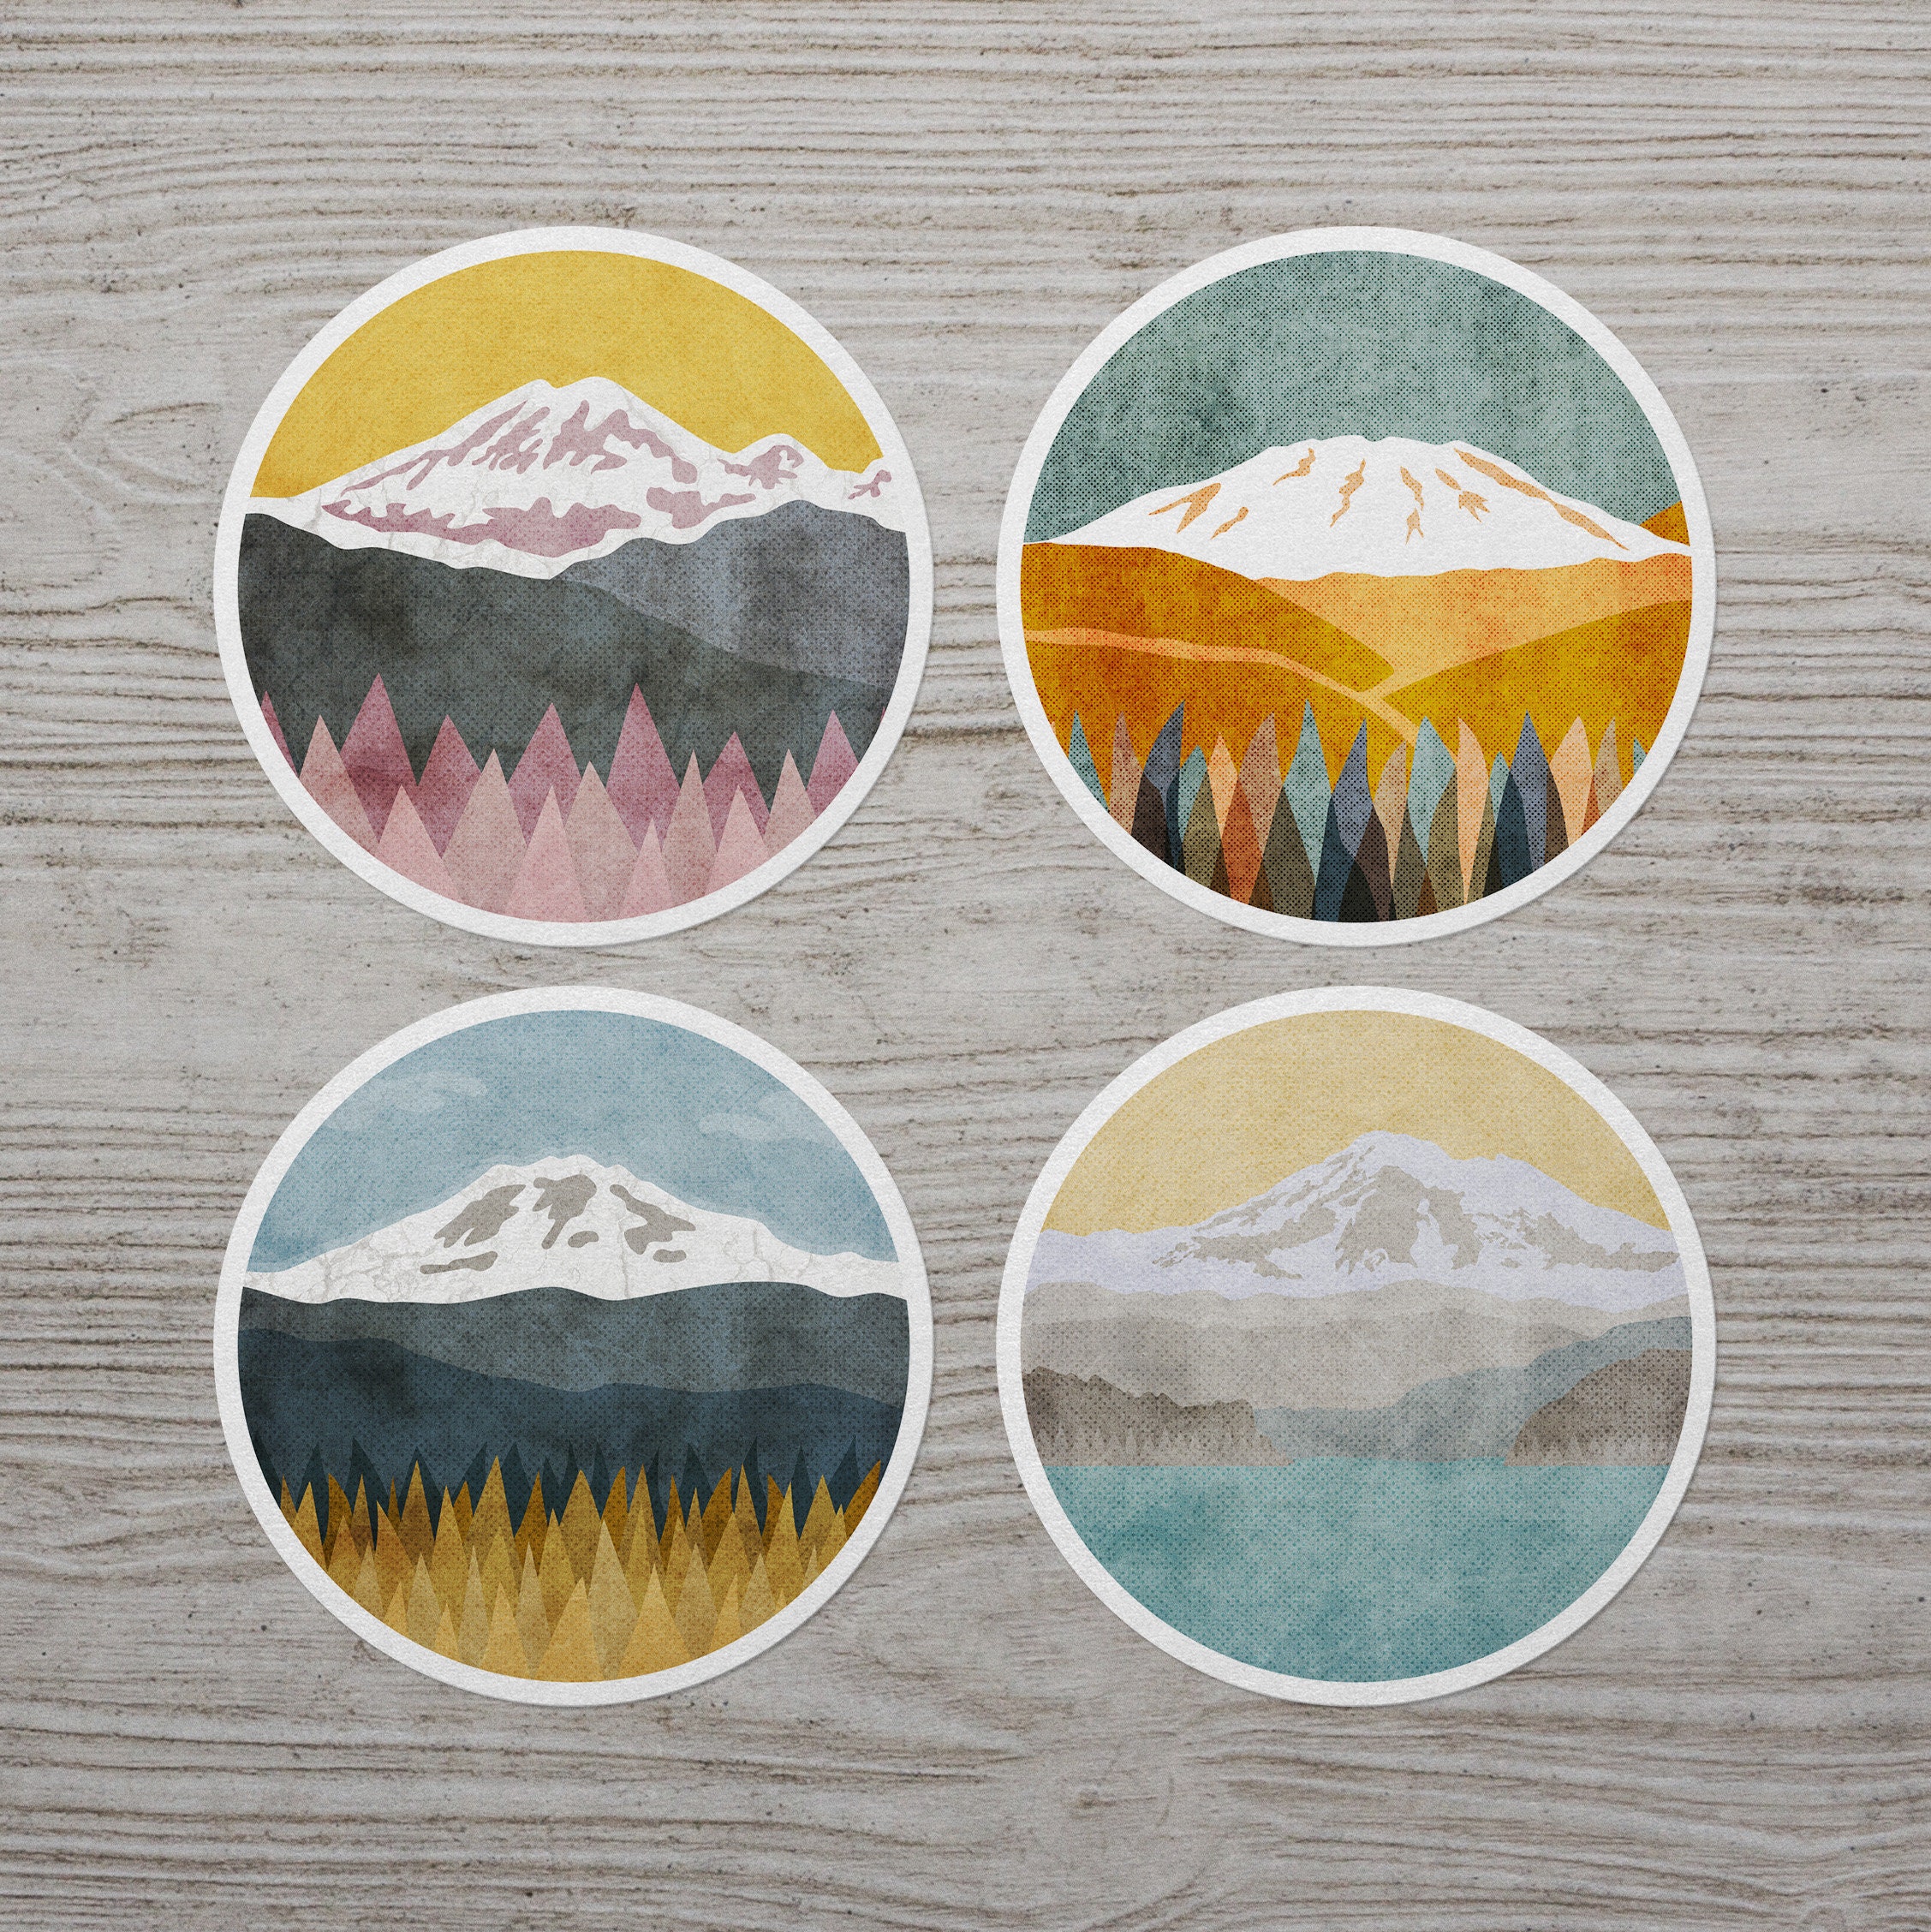 100+ Mount Adams From Saint Helens Stock Photos, Pictures